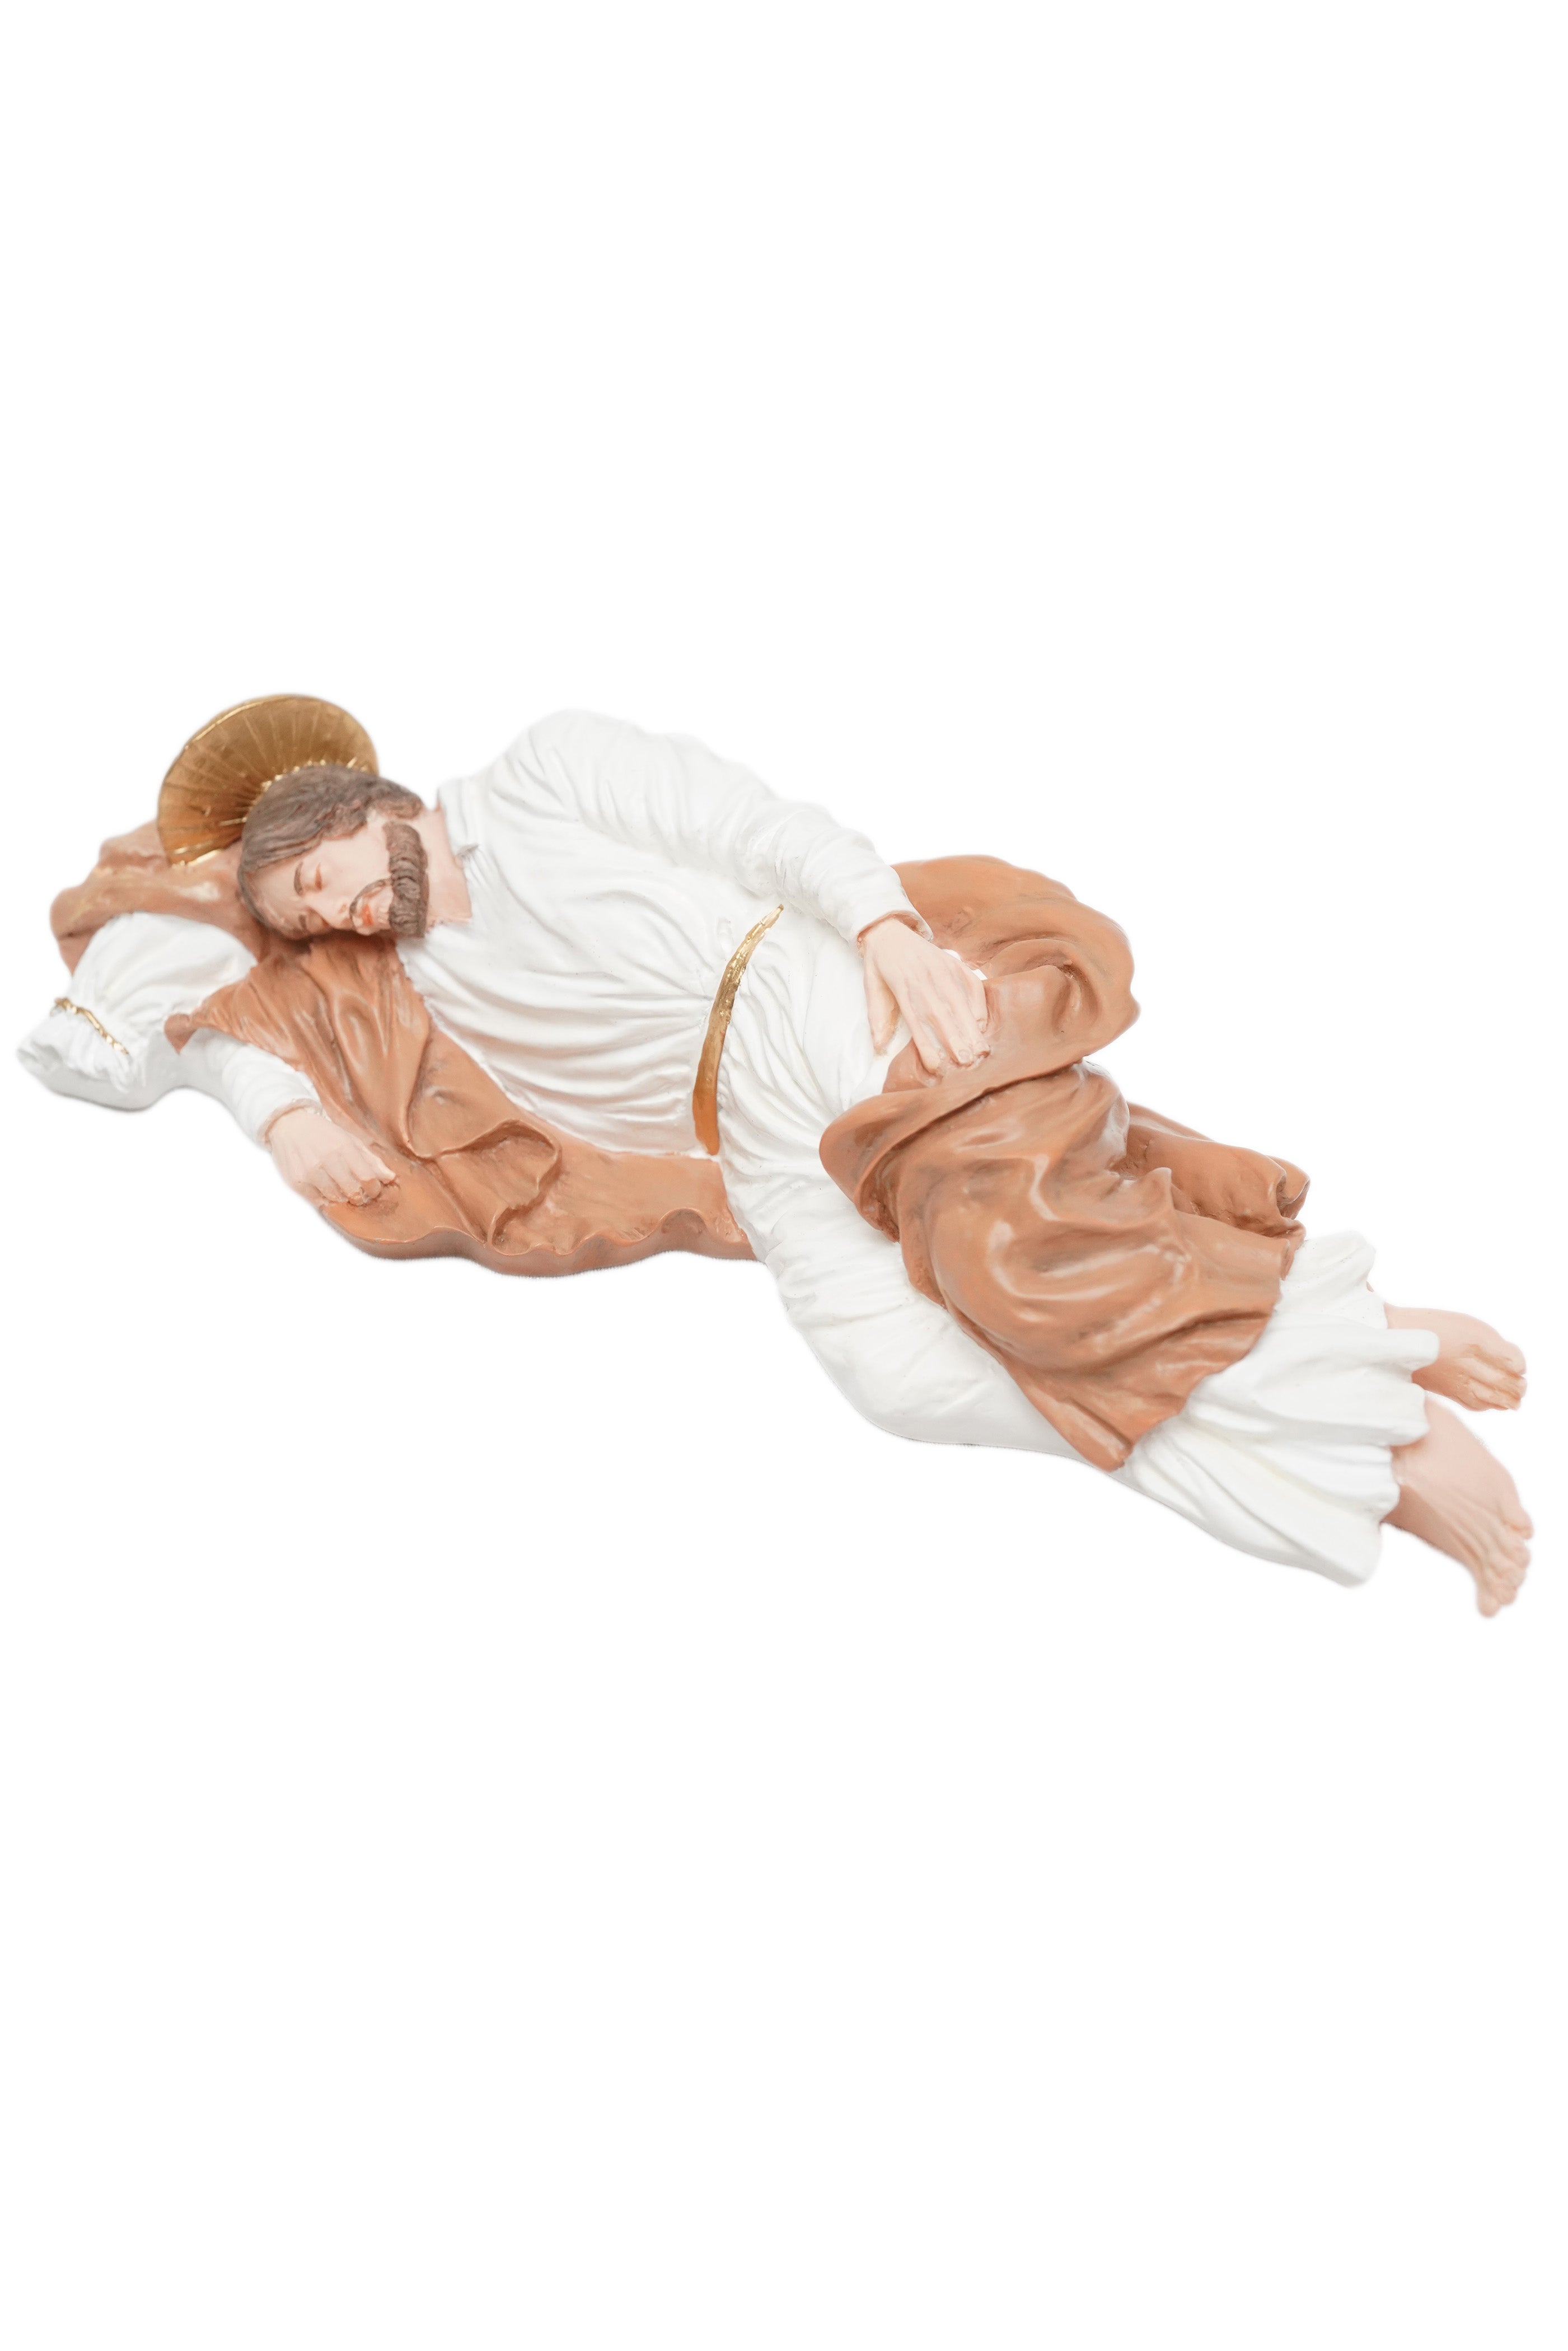 12 Inch Sleeping Saint St Joseph Catholic Statue Sculpture Figurine Vittoria Collection Made in Italy Religious Pope Francis